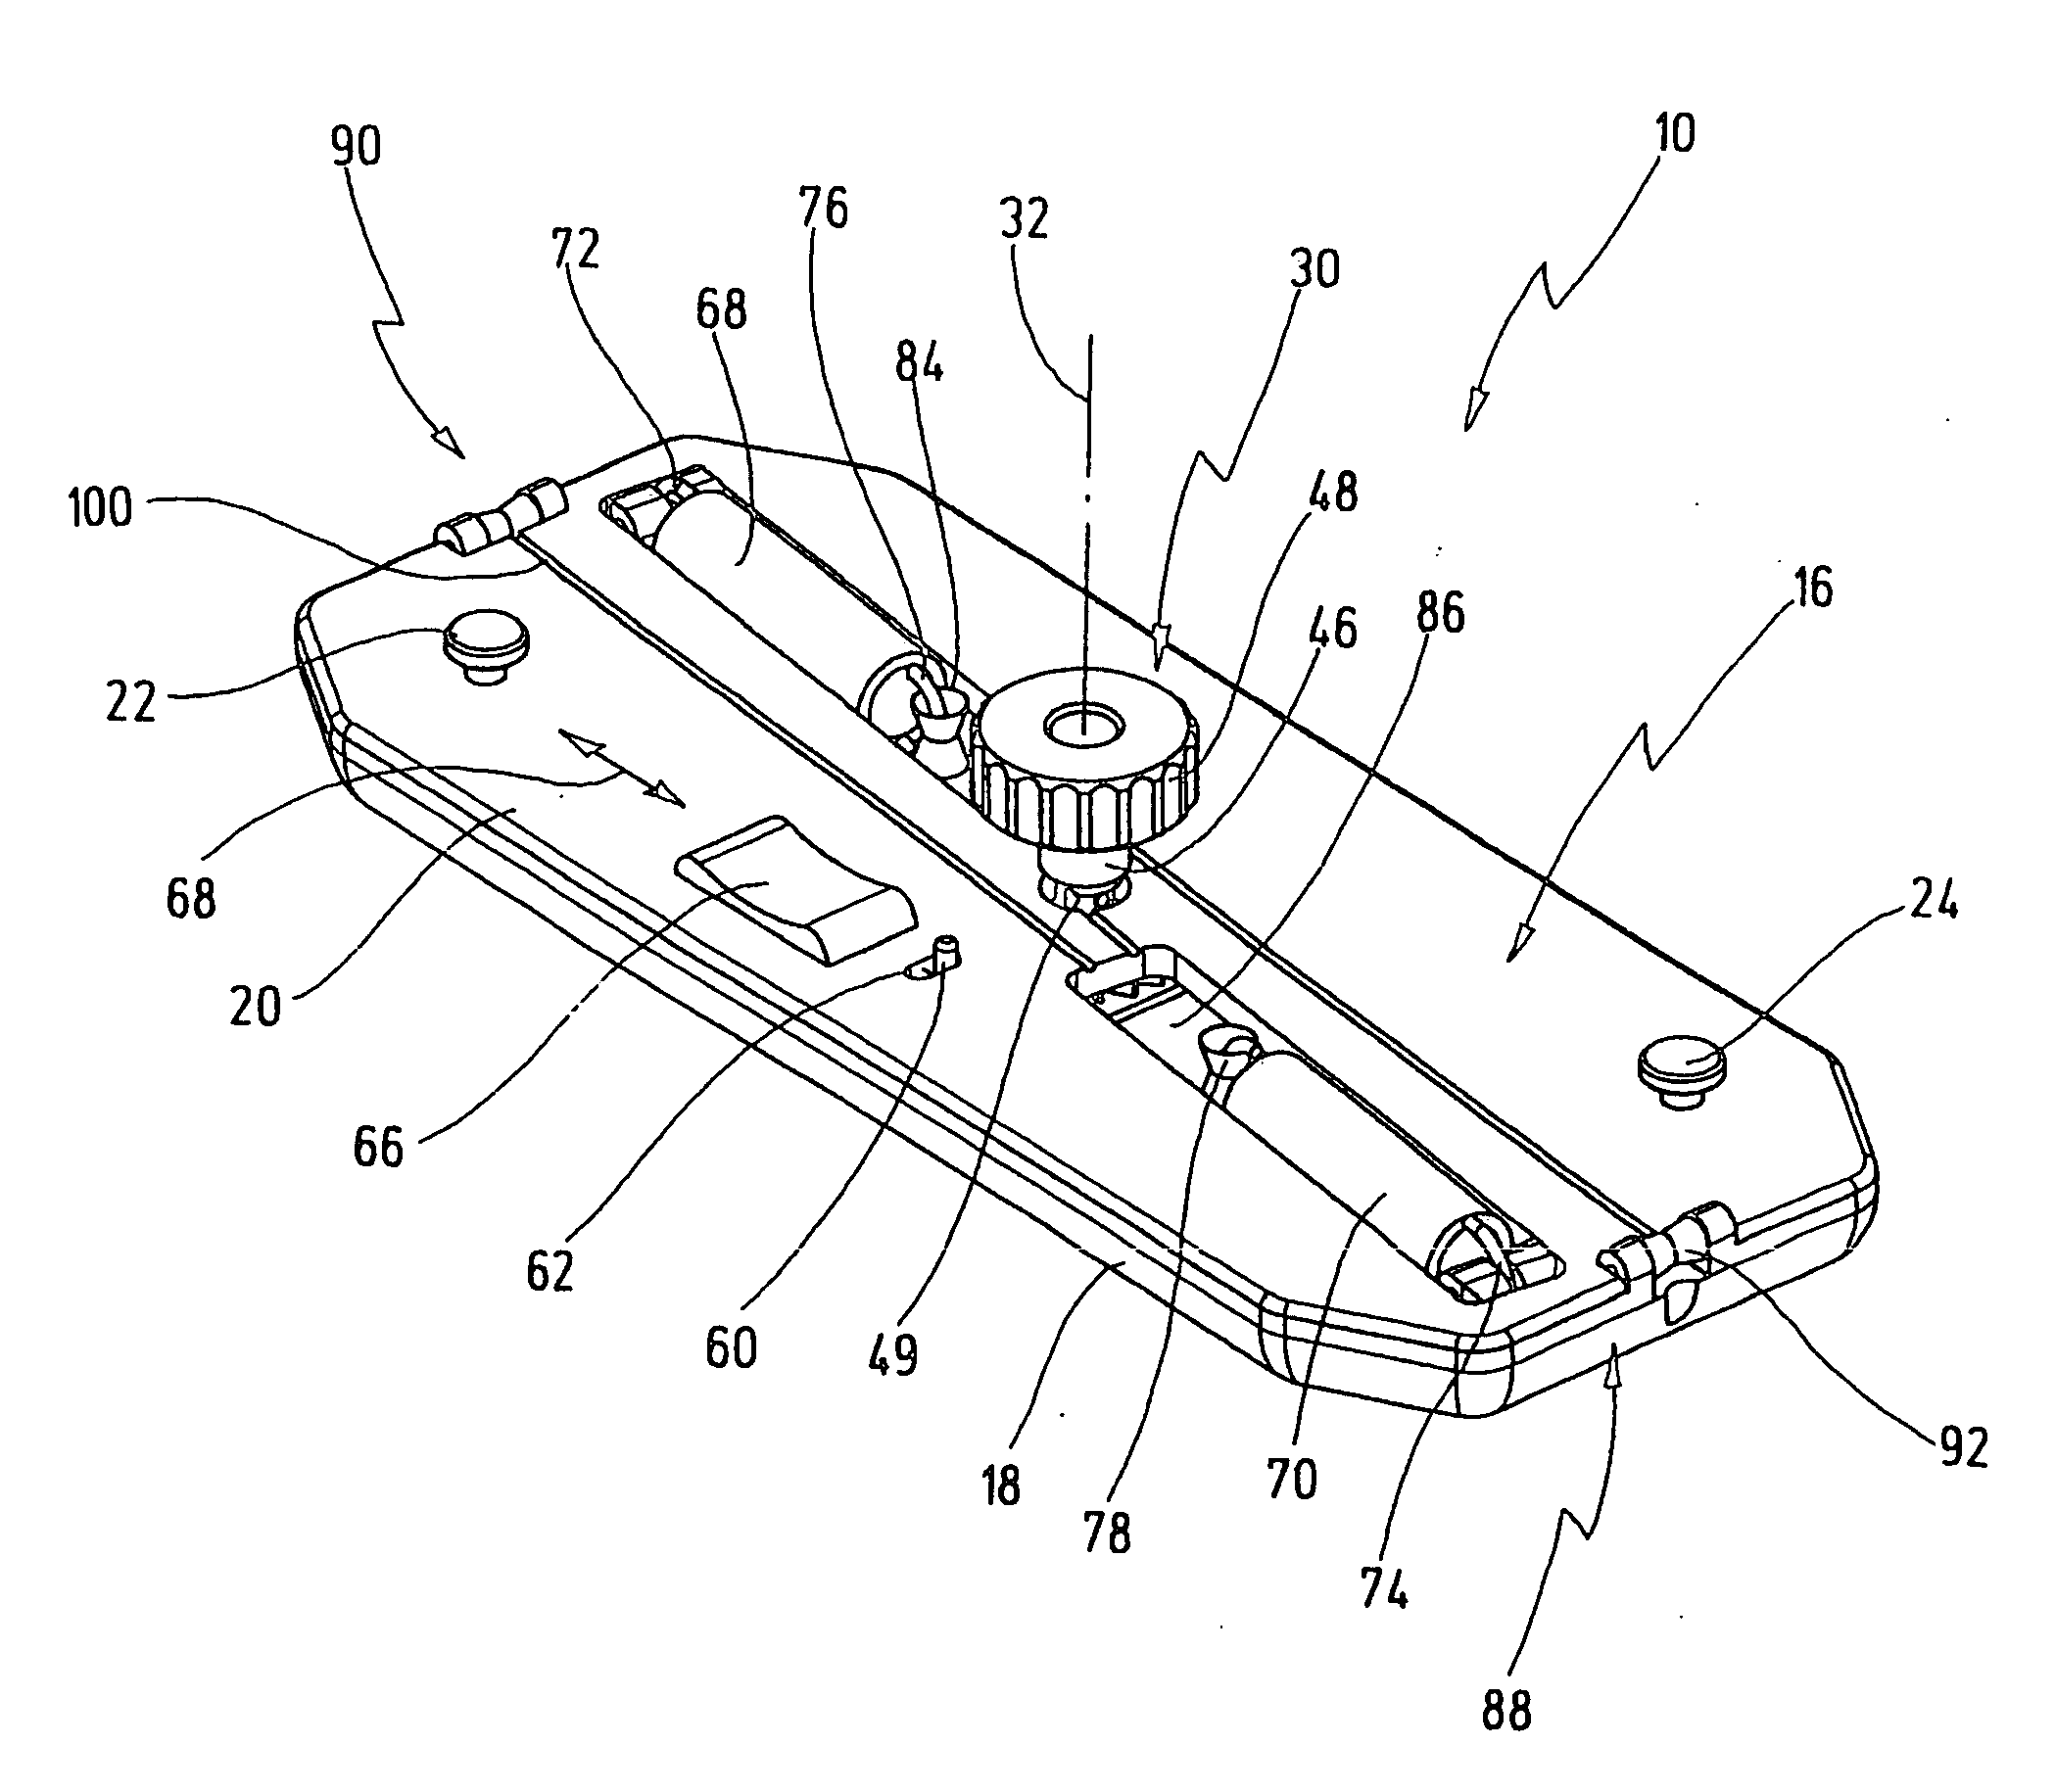 Device for fixing and tensioning at least one pulling thread for applying a neovagina